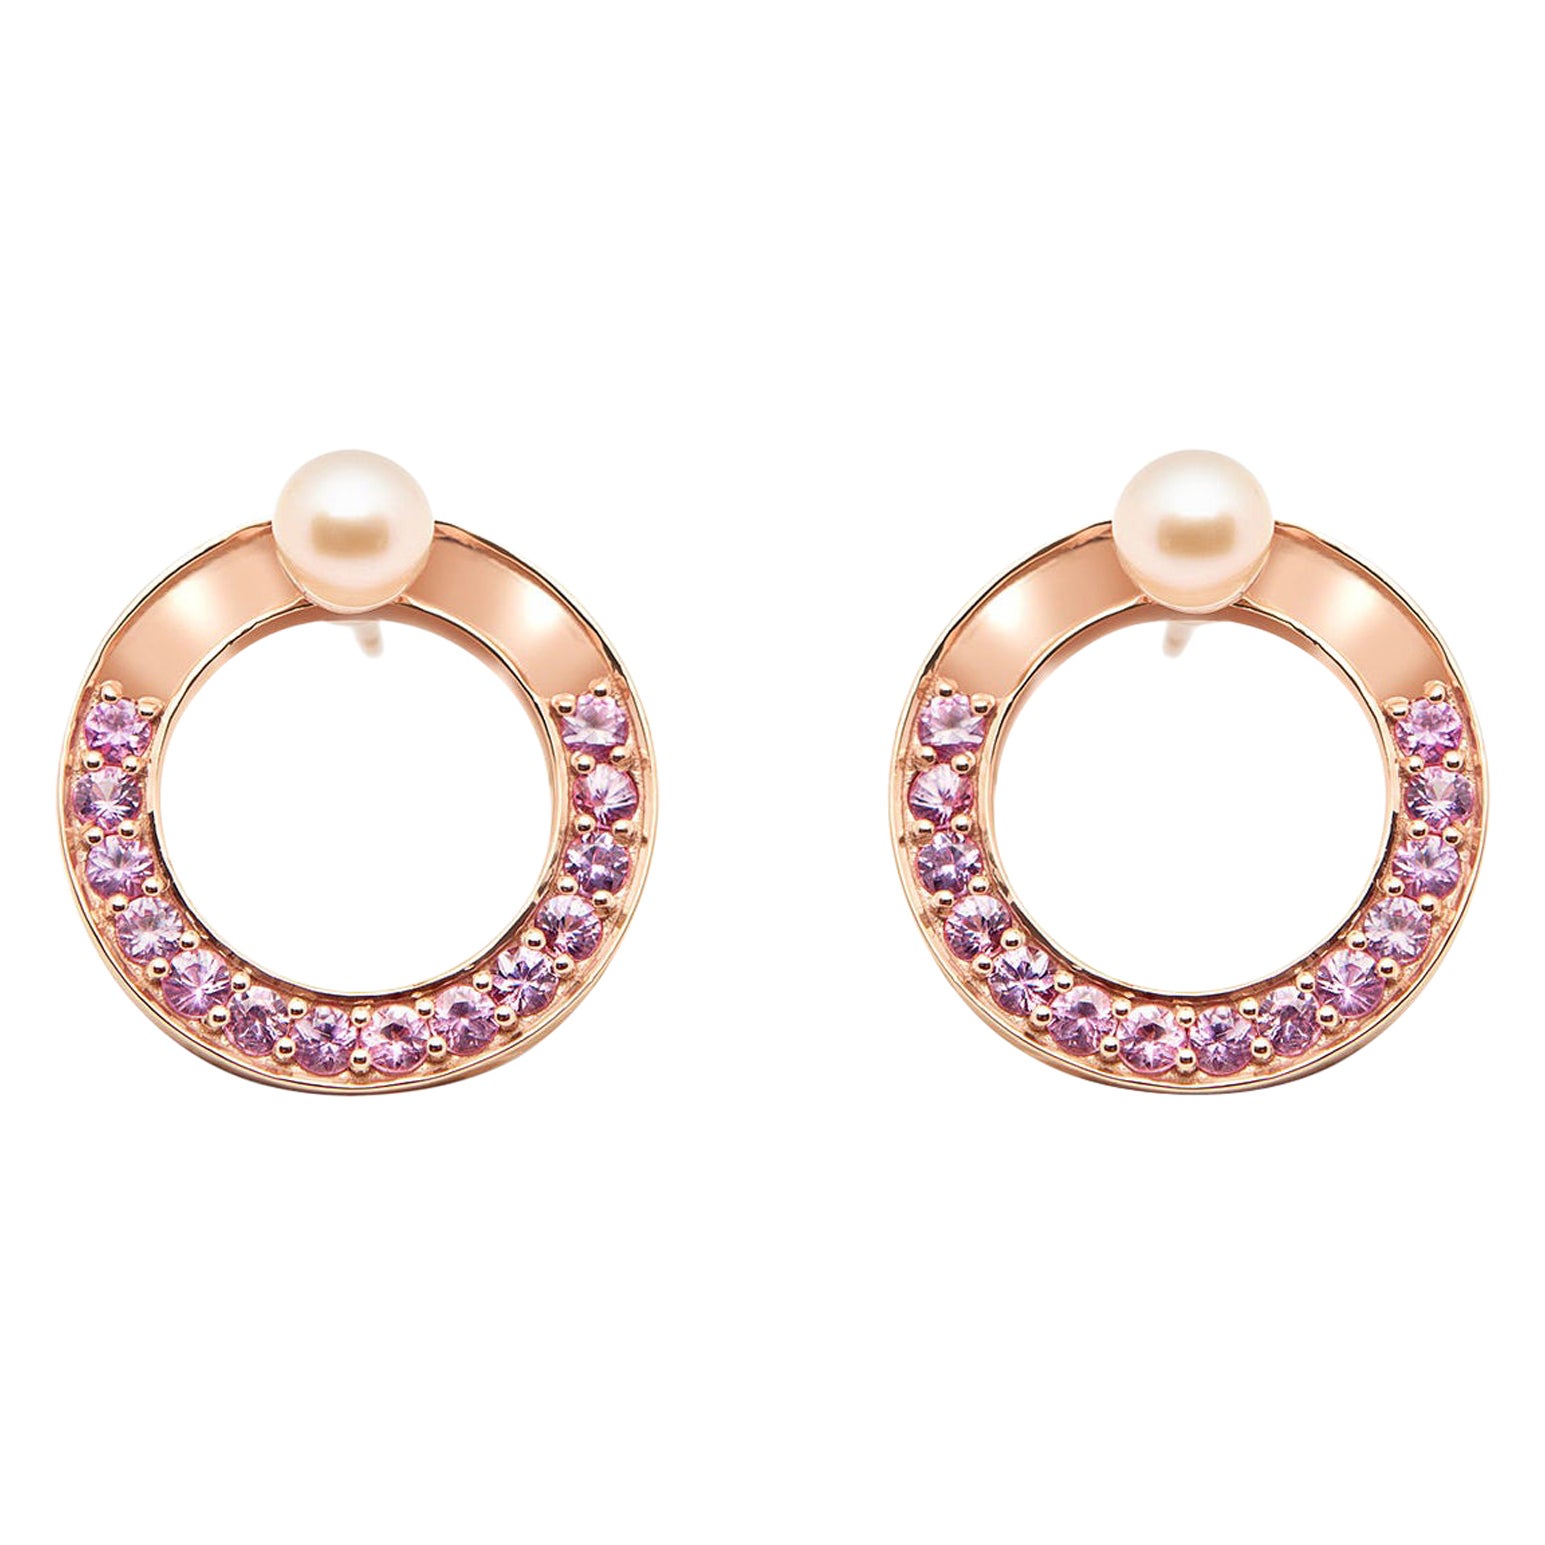 Rose Gold Earrings With Sapphires And Pearls